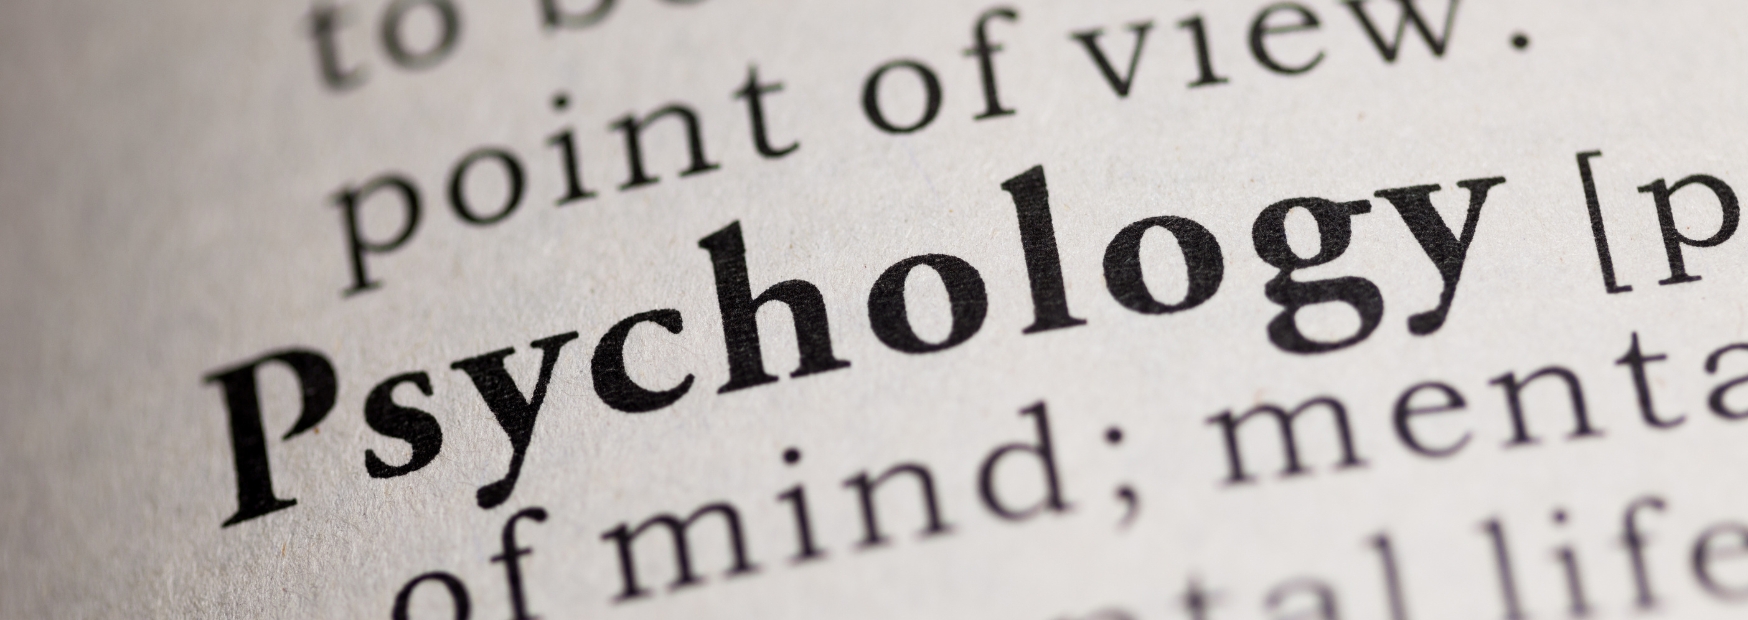 dual masters and phd programs in psychology california